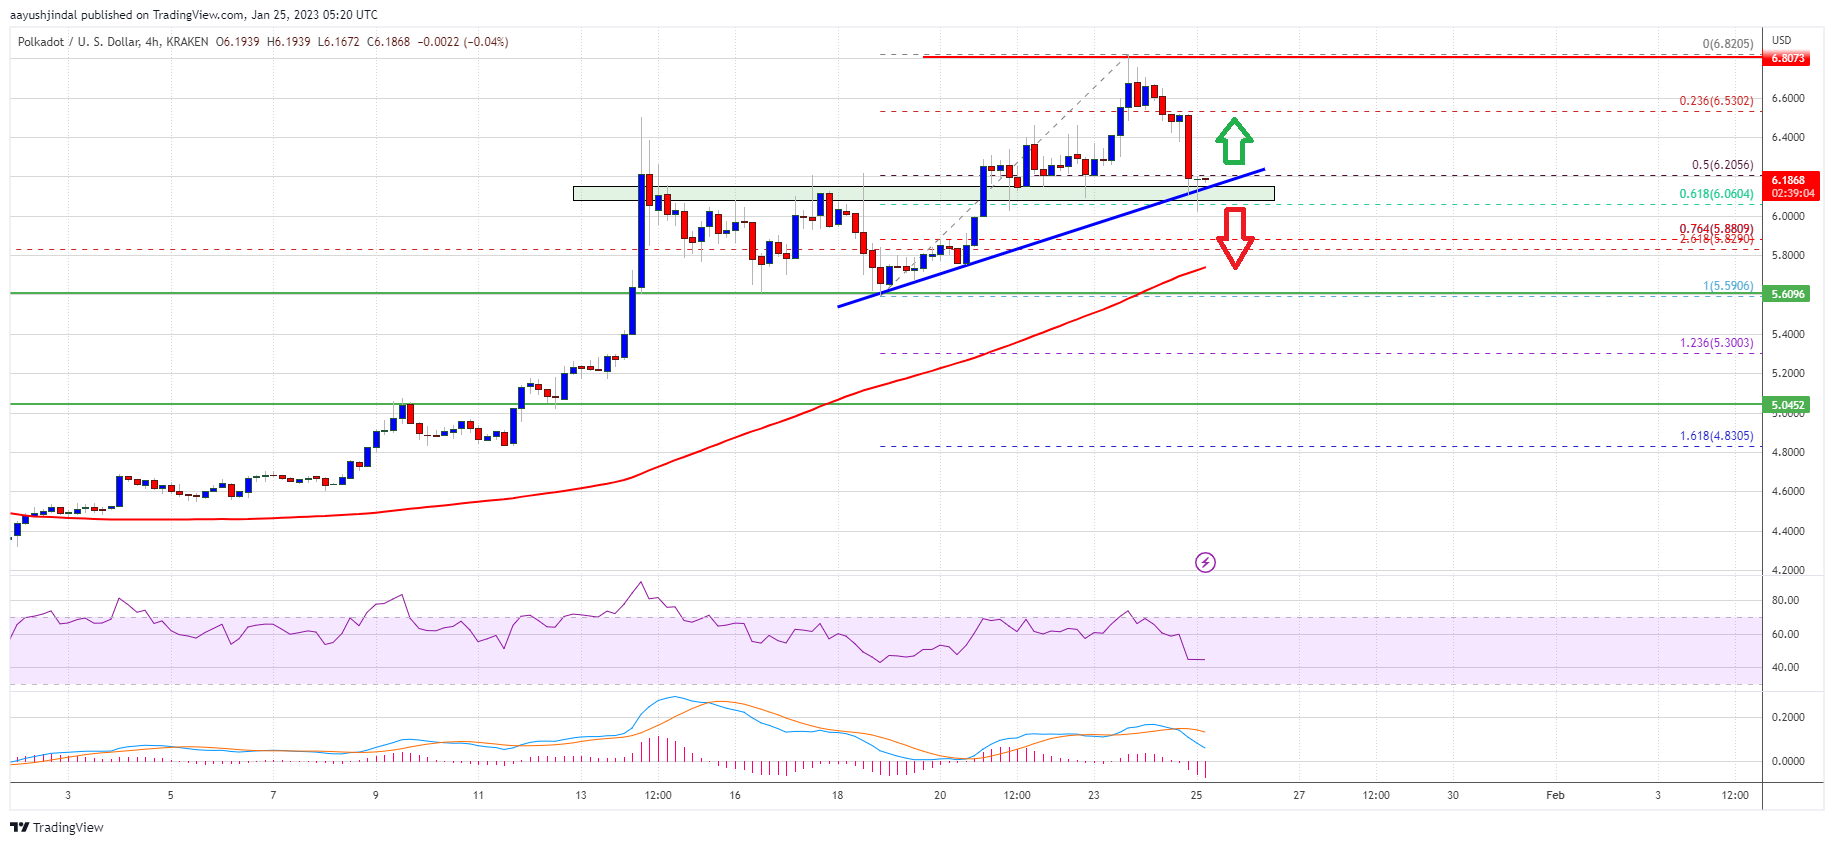 CRYPTOCURRENCY: DOT Price (Polkadot) Indicators Suggest Strong Case For Fresh Rally